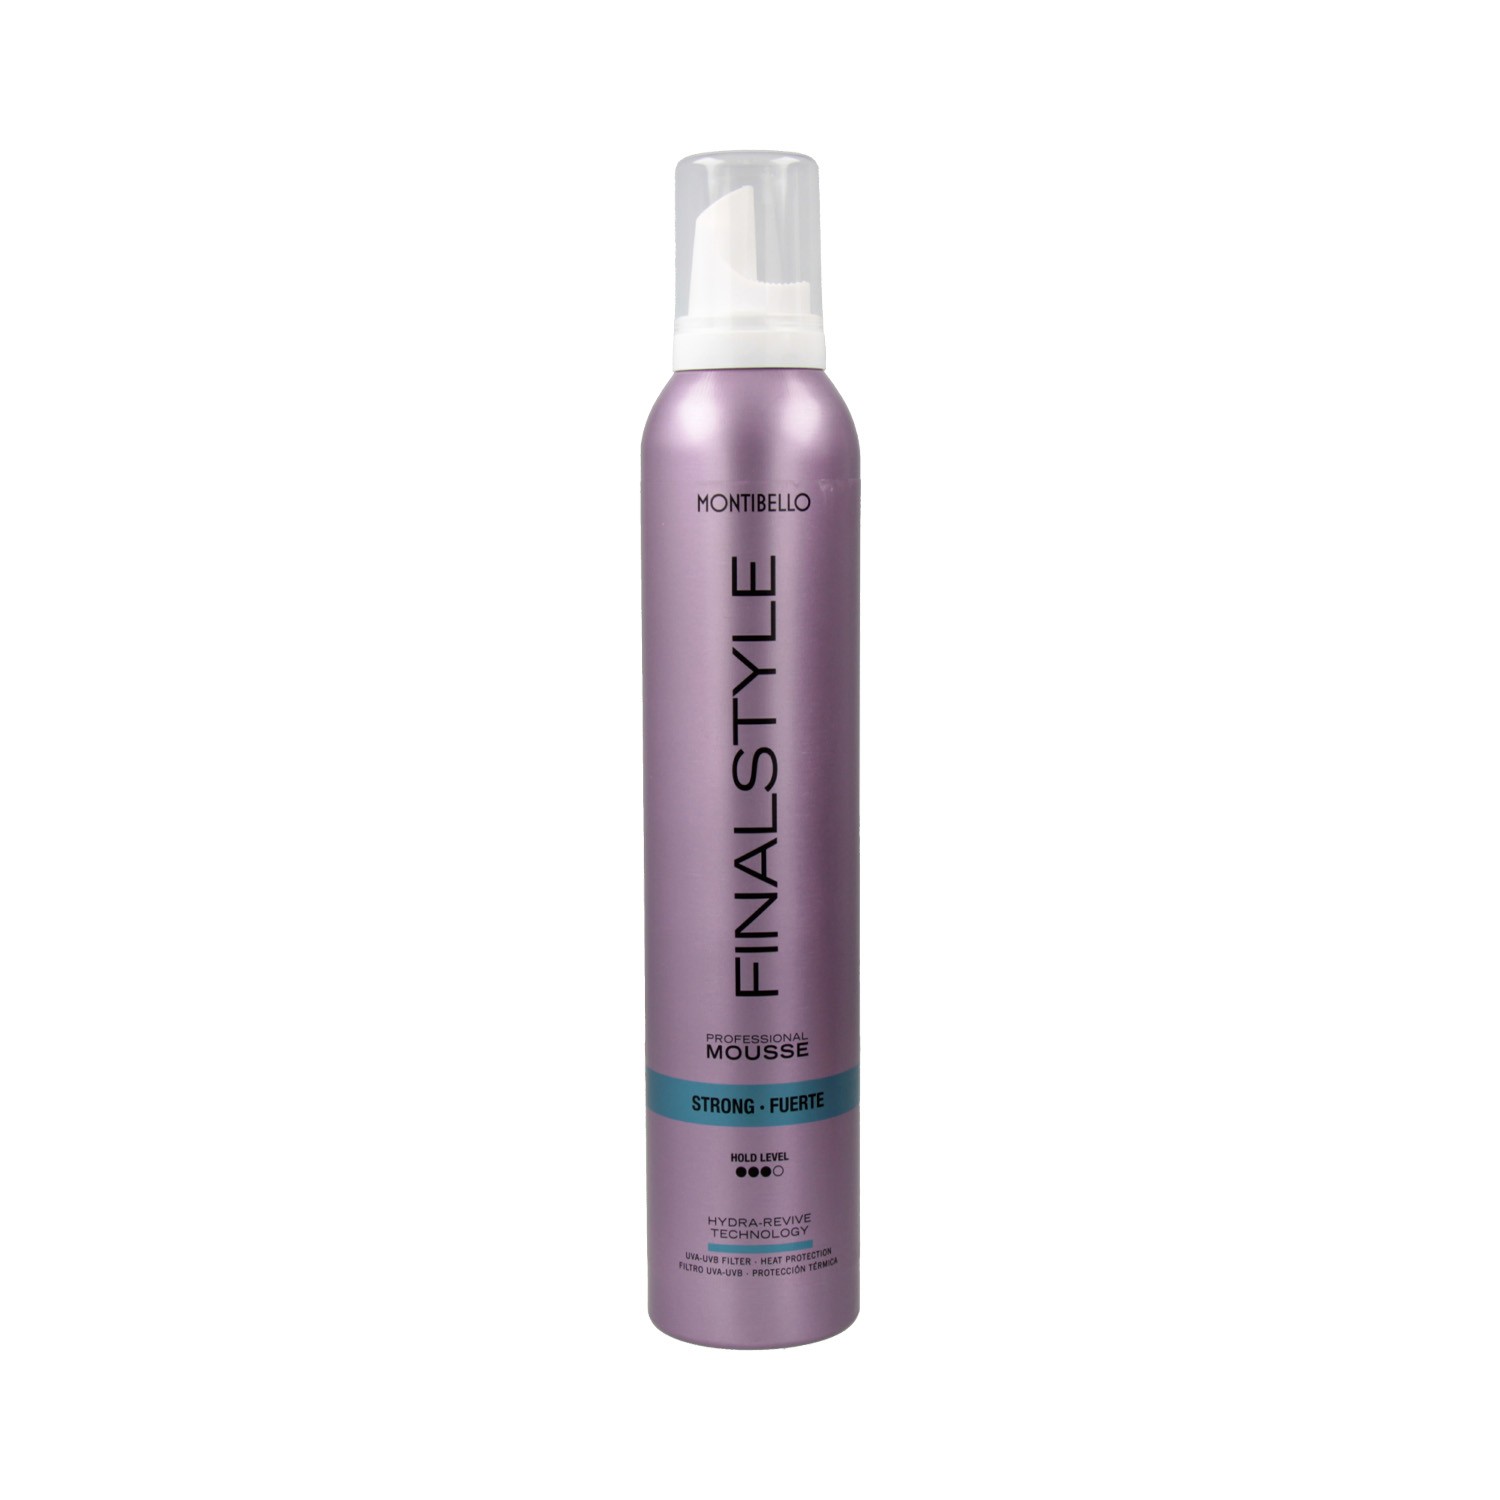 Montibello Mousse Finalstyle Fort 320 Ml